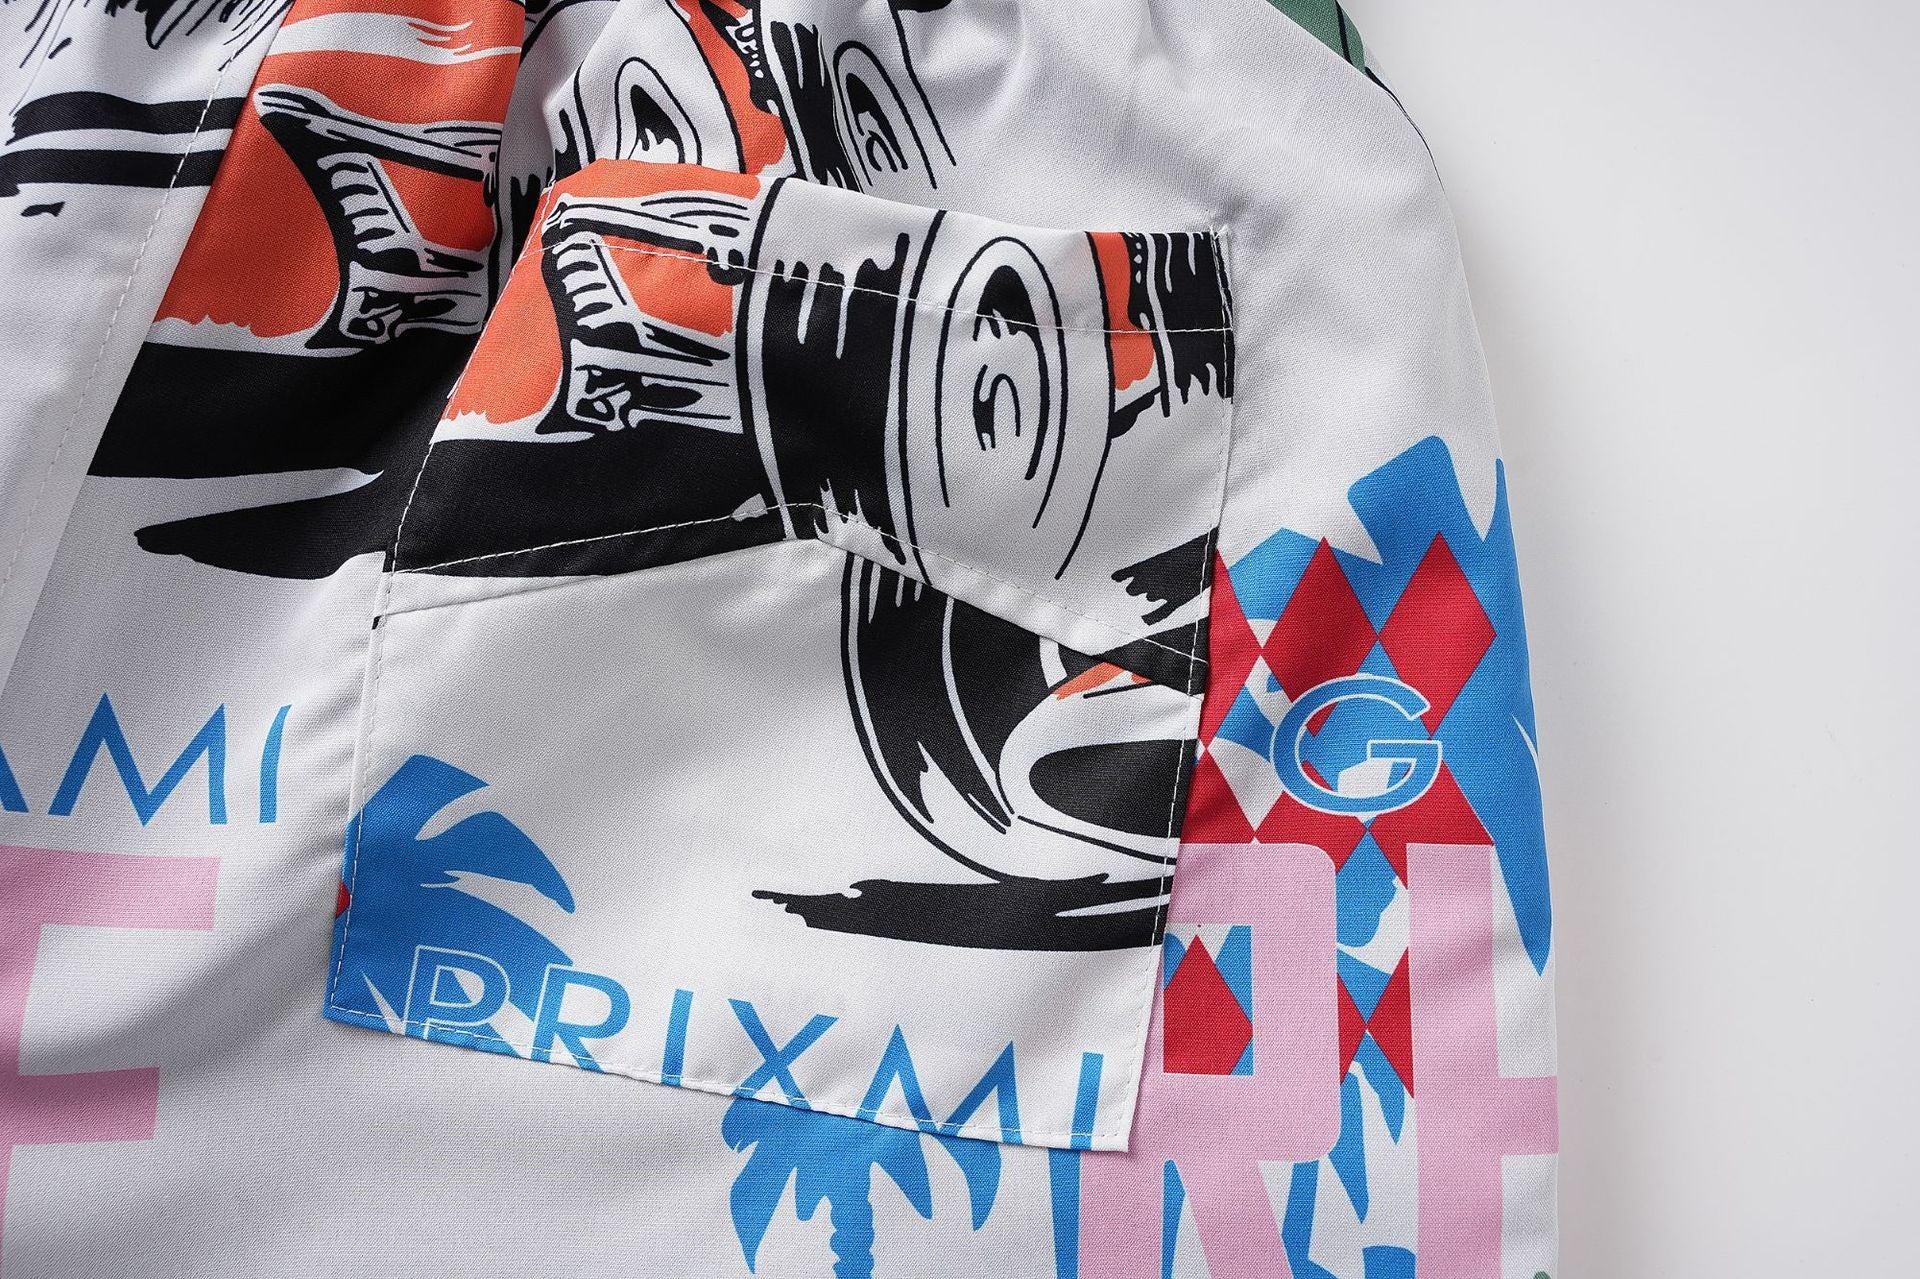 RHUDE X WEBSTER MIAMI RACING LINEN GRAND PRIX BUTTON UP Shorts